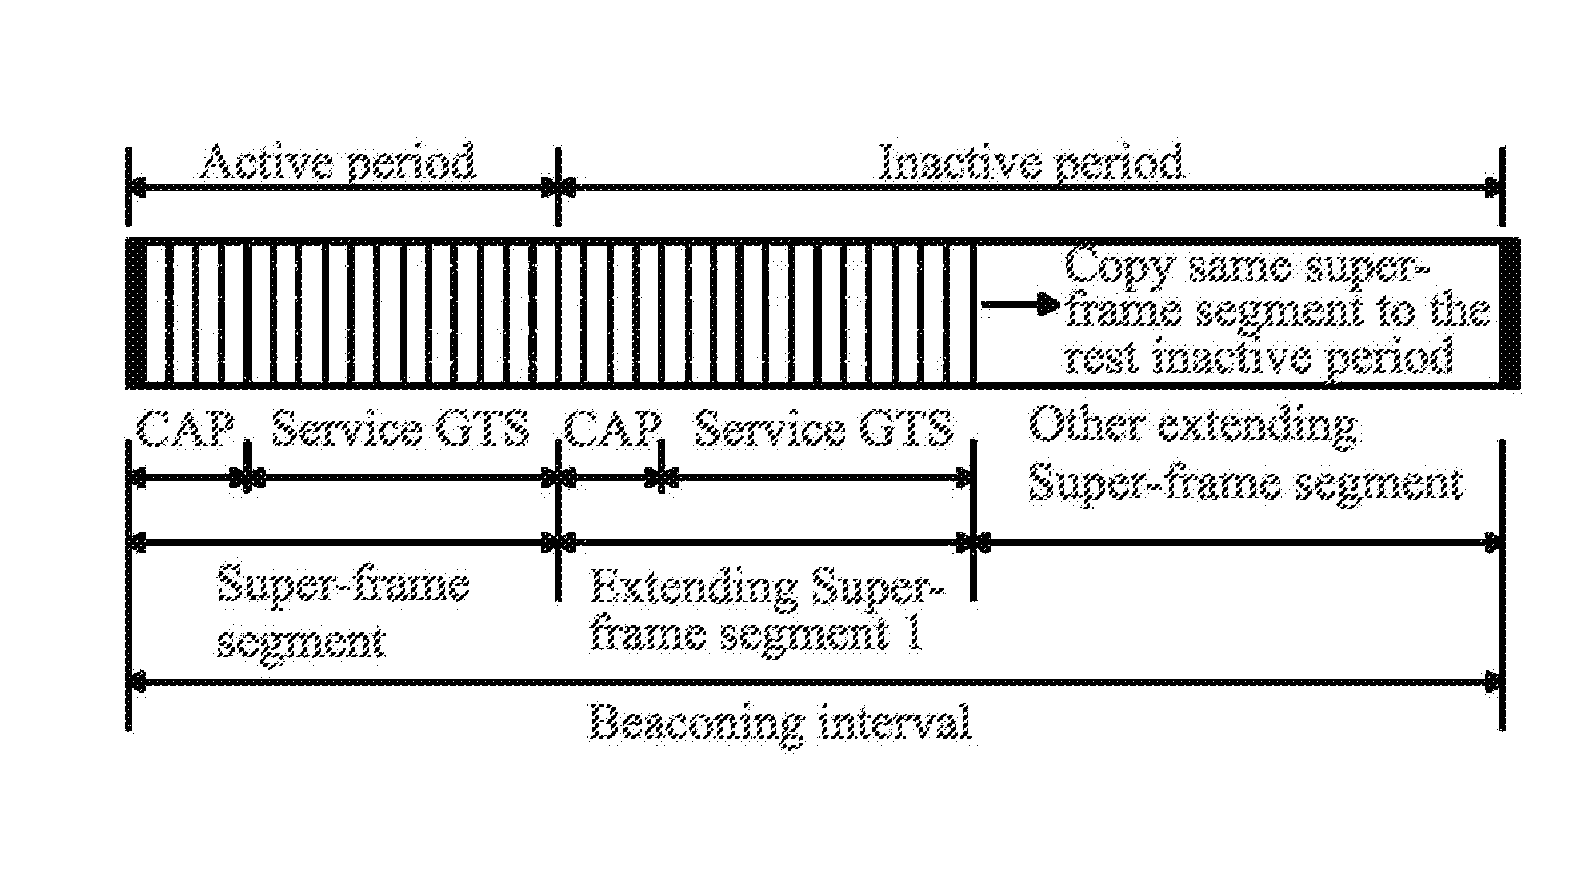 Method for using an extending super-frame to transfer data in a short distance wireless personal area network